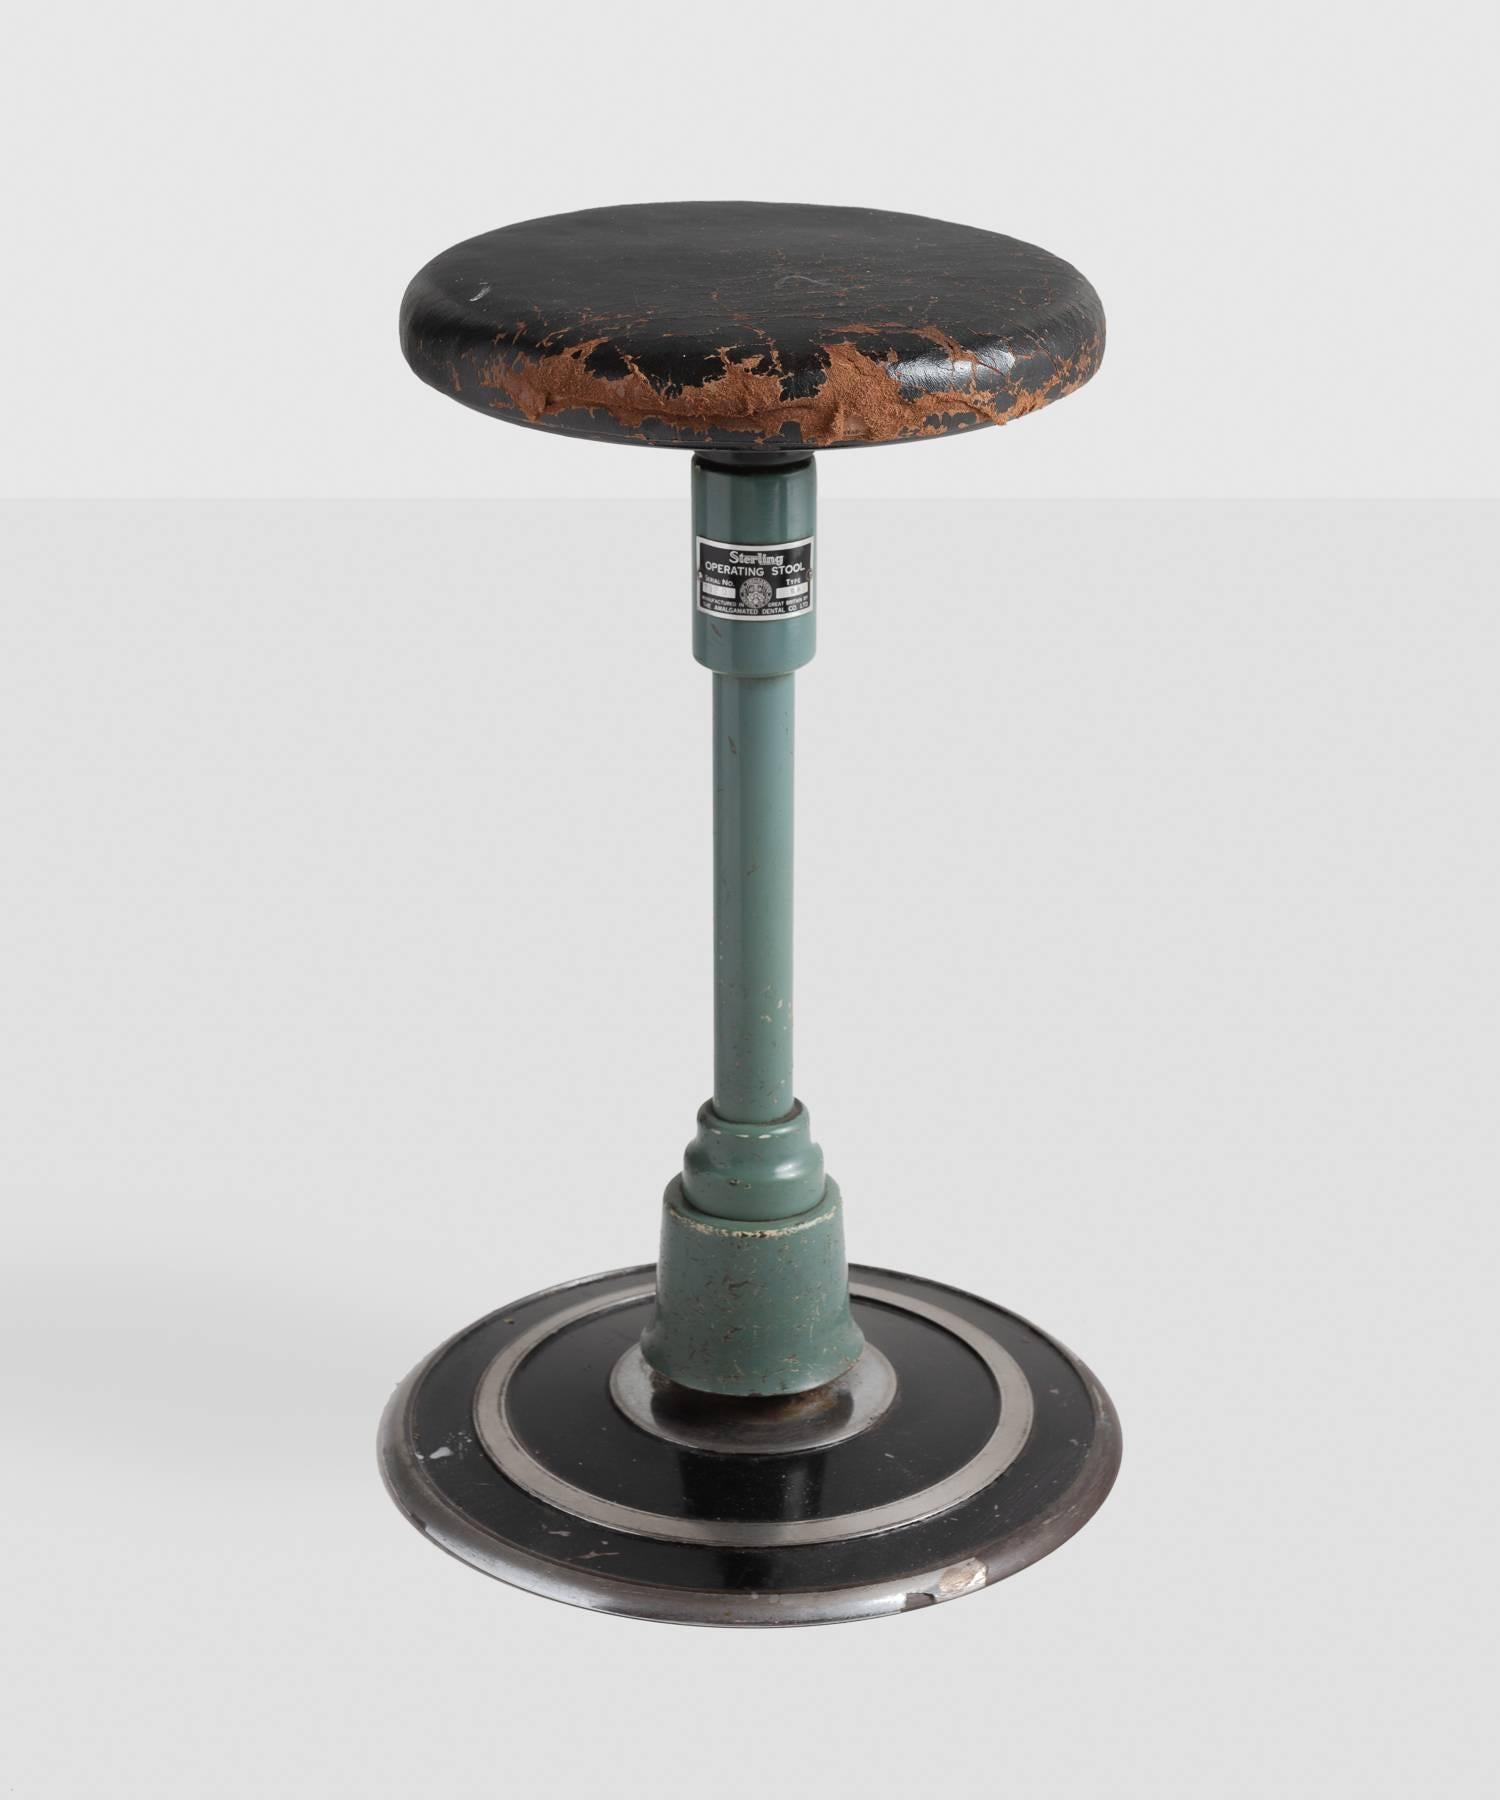 Sterling operating stool, circa 1940

Leather-topped, adjustable stool with wonderful patina and manufacturer's seal.